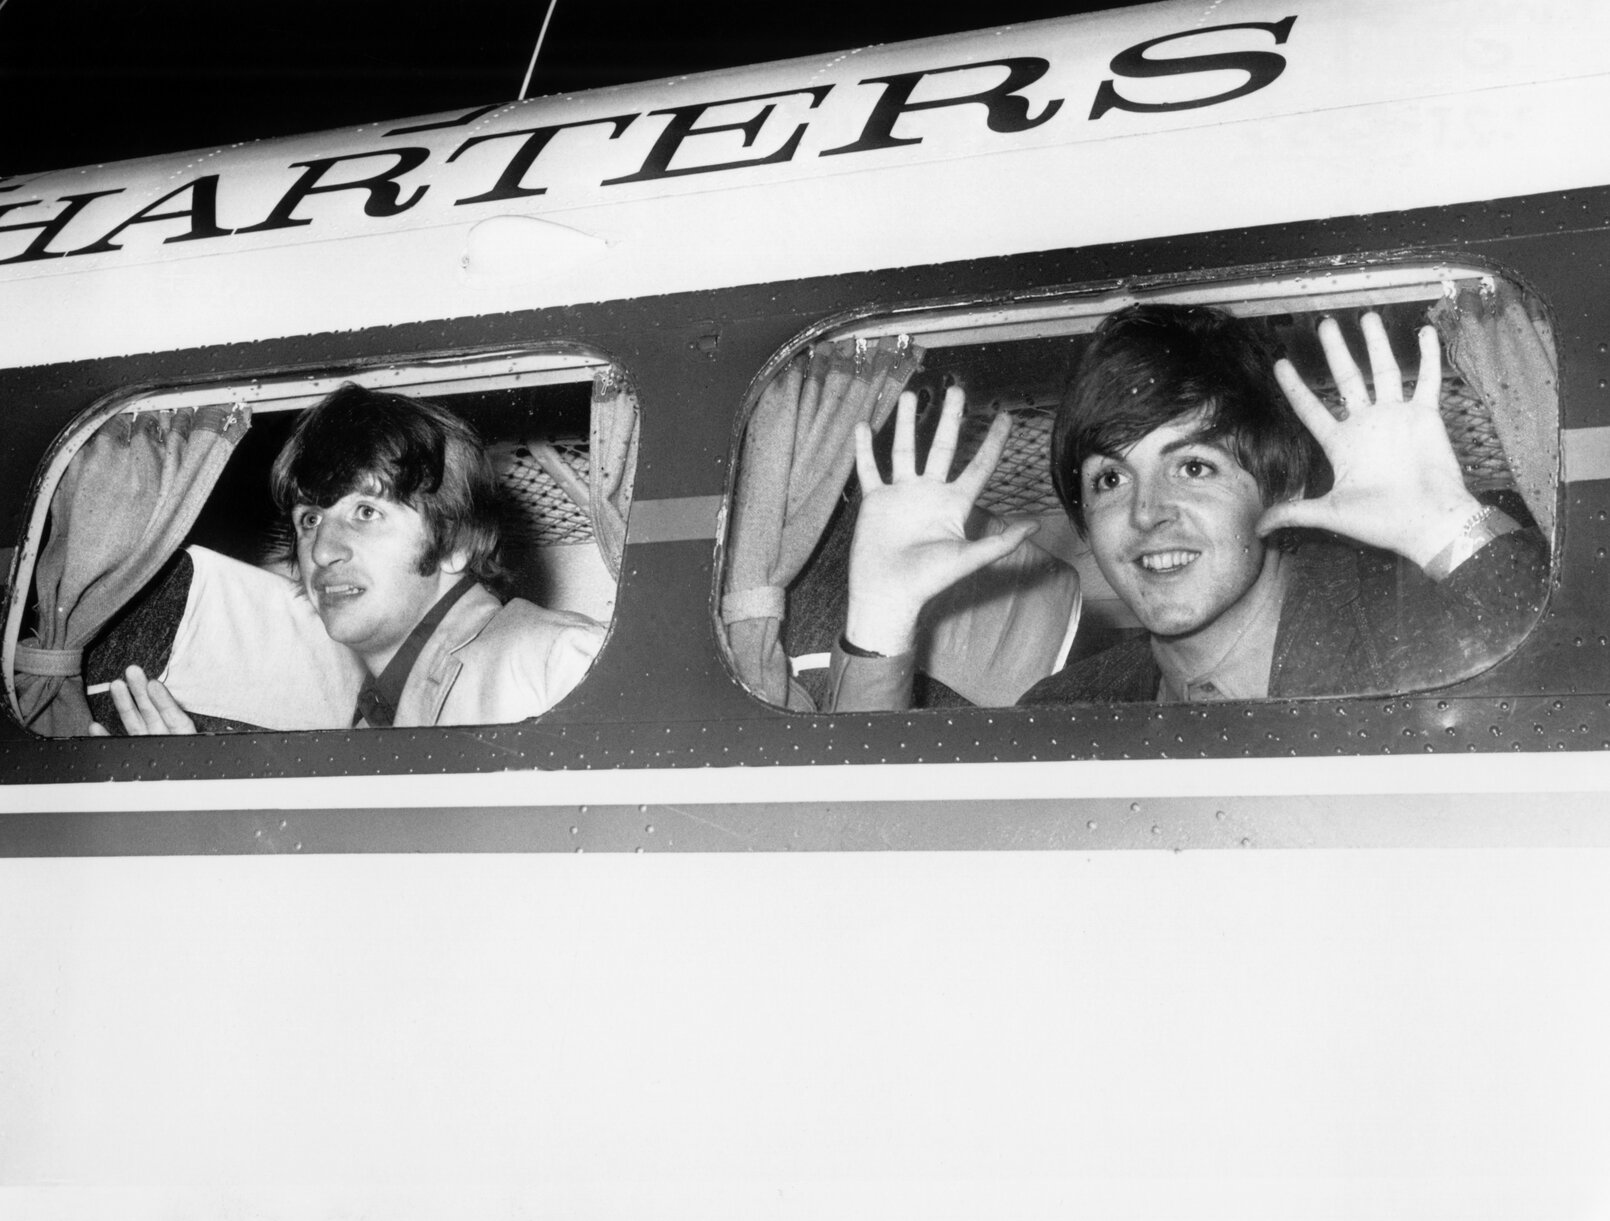 Ringo Starr and Paul McCartney of The Beatles look out the window of a plane.